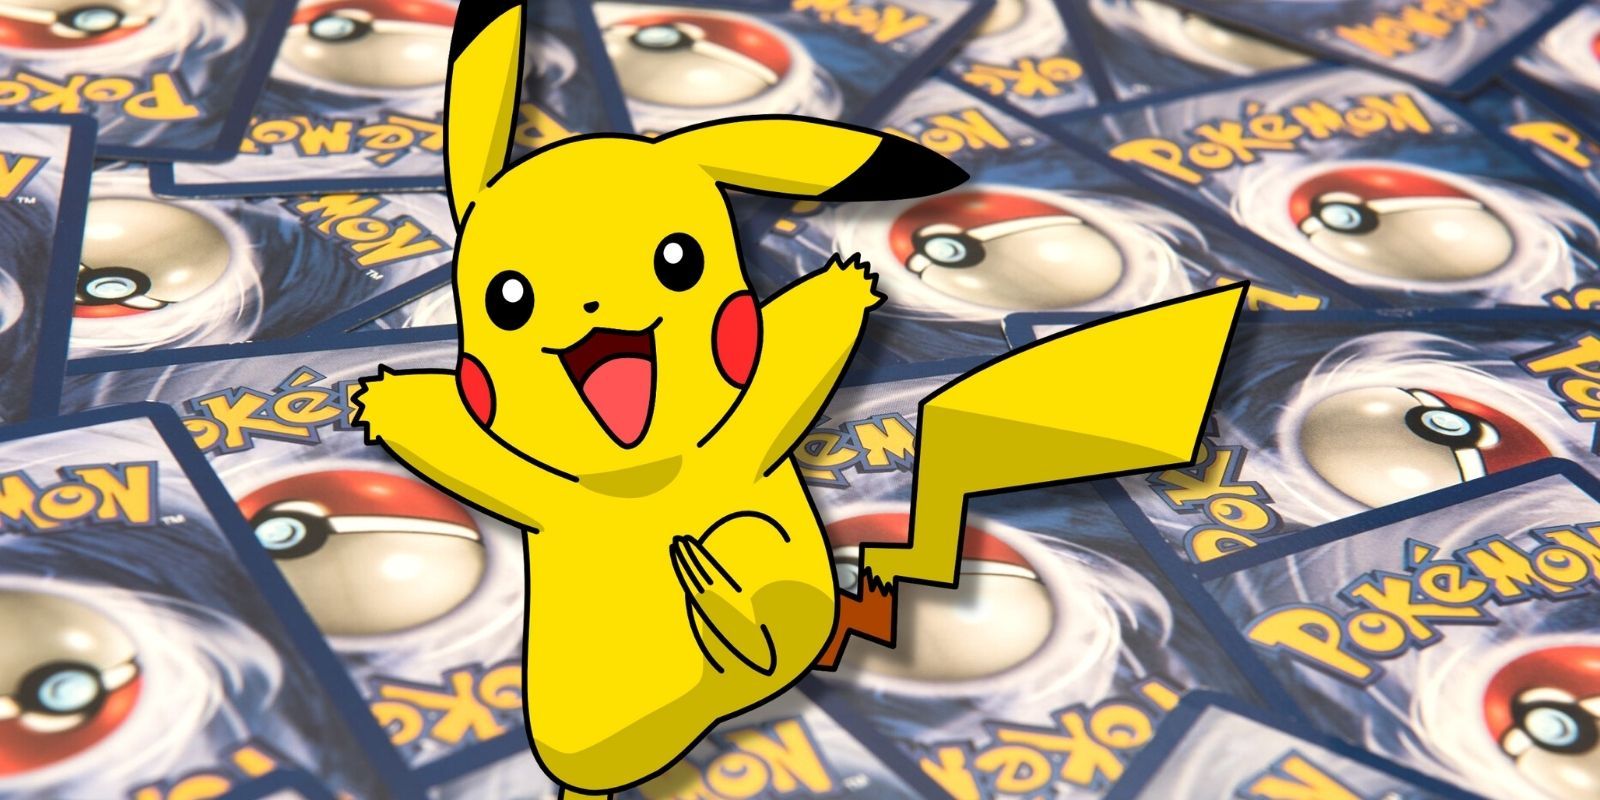 This Pokémon TCG Pikachu Illustrator Promo Card Sells for $840,000 USD at  Auction